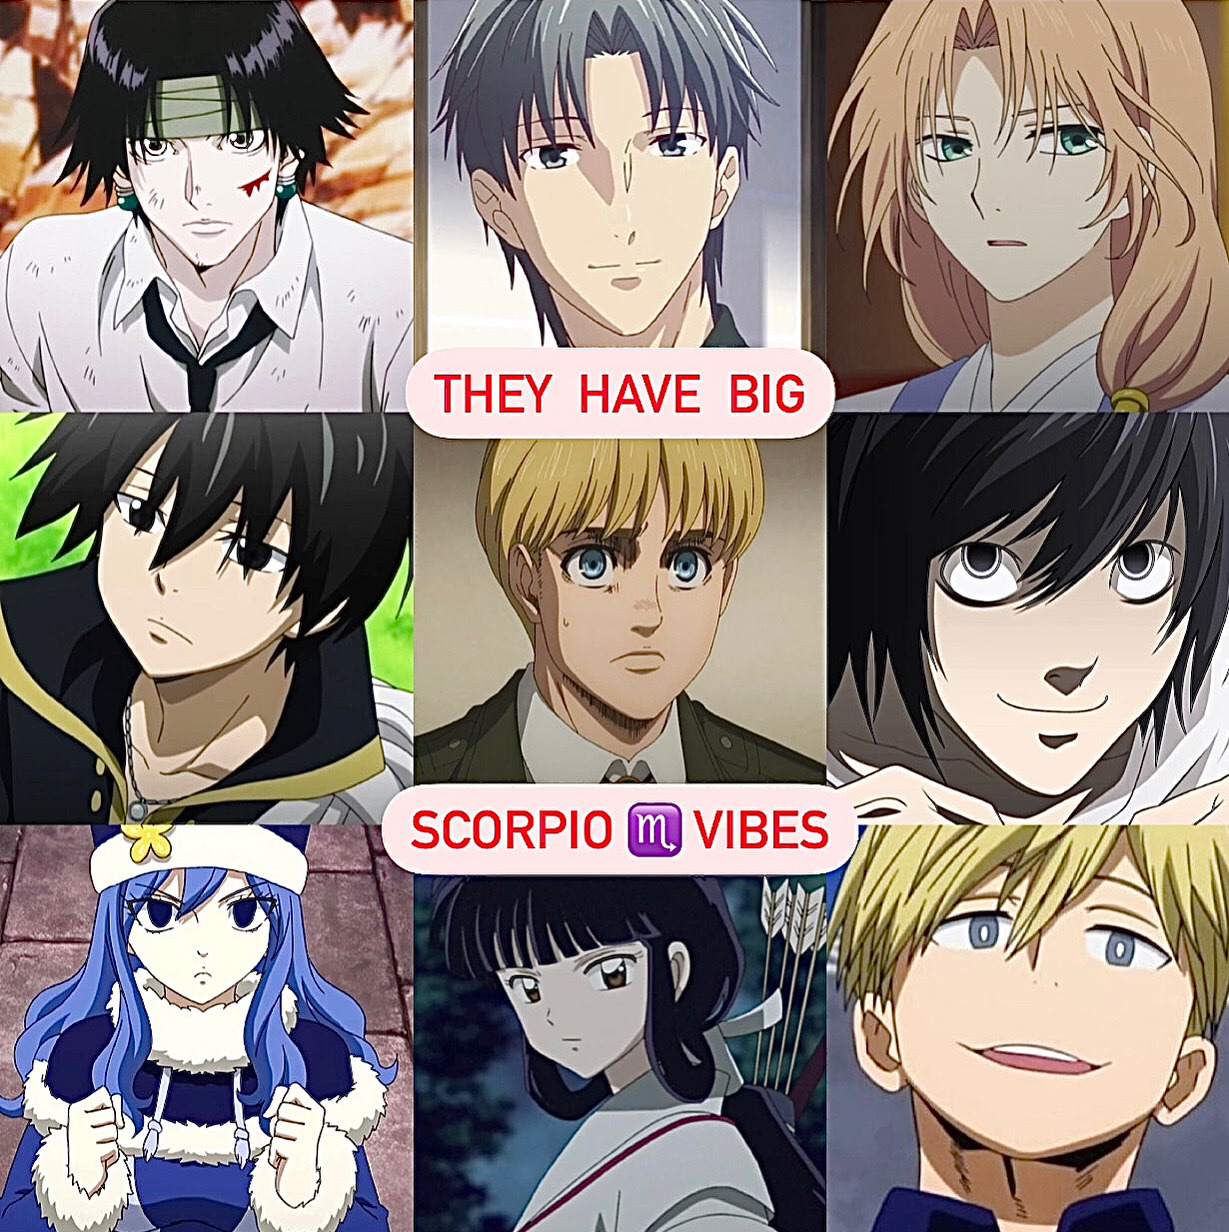 What Anime Character Archetype Are You Based On Your Zodiac Sign?